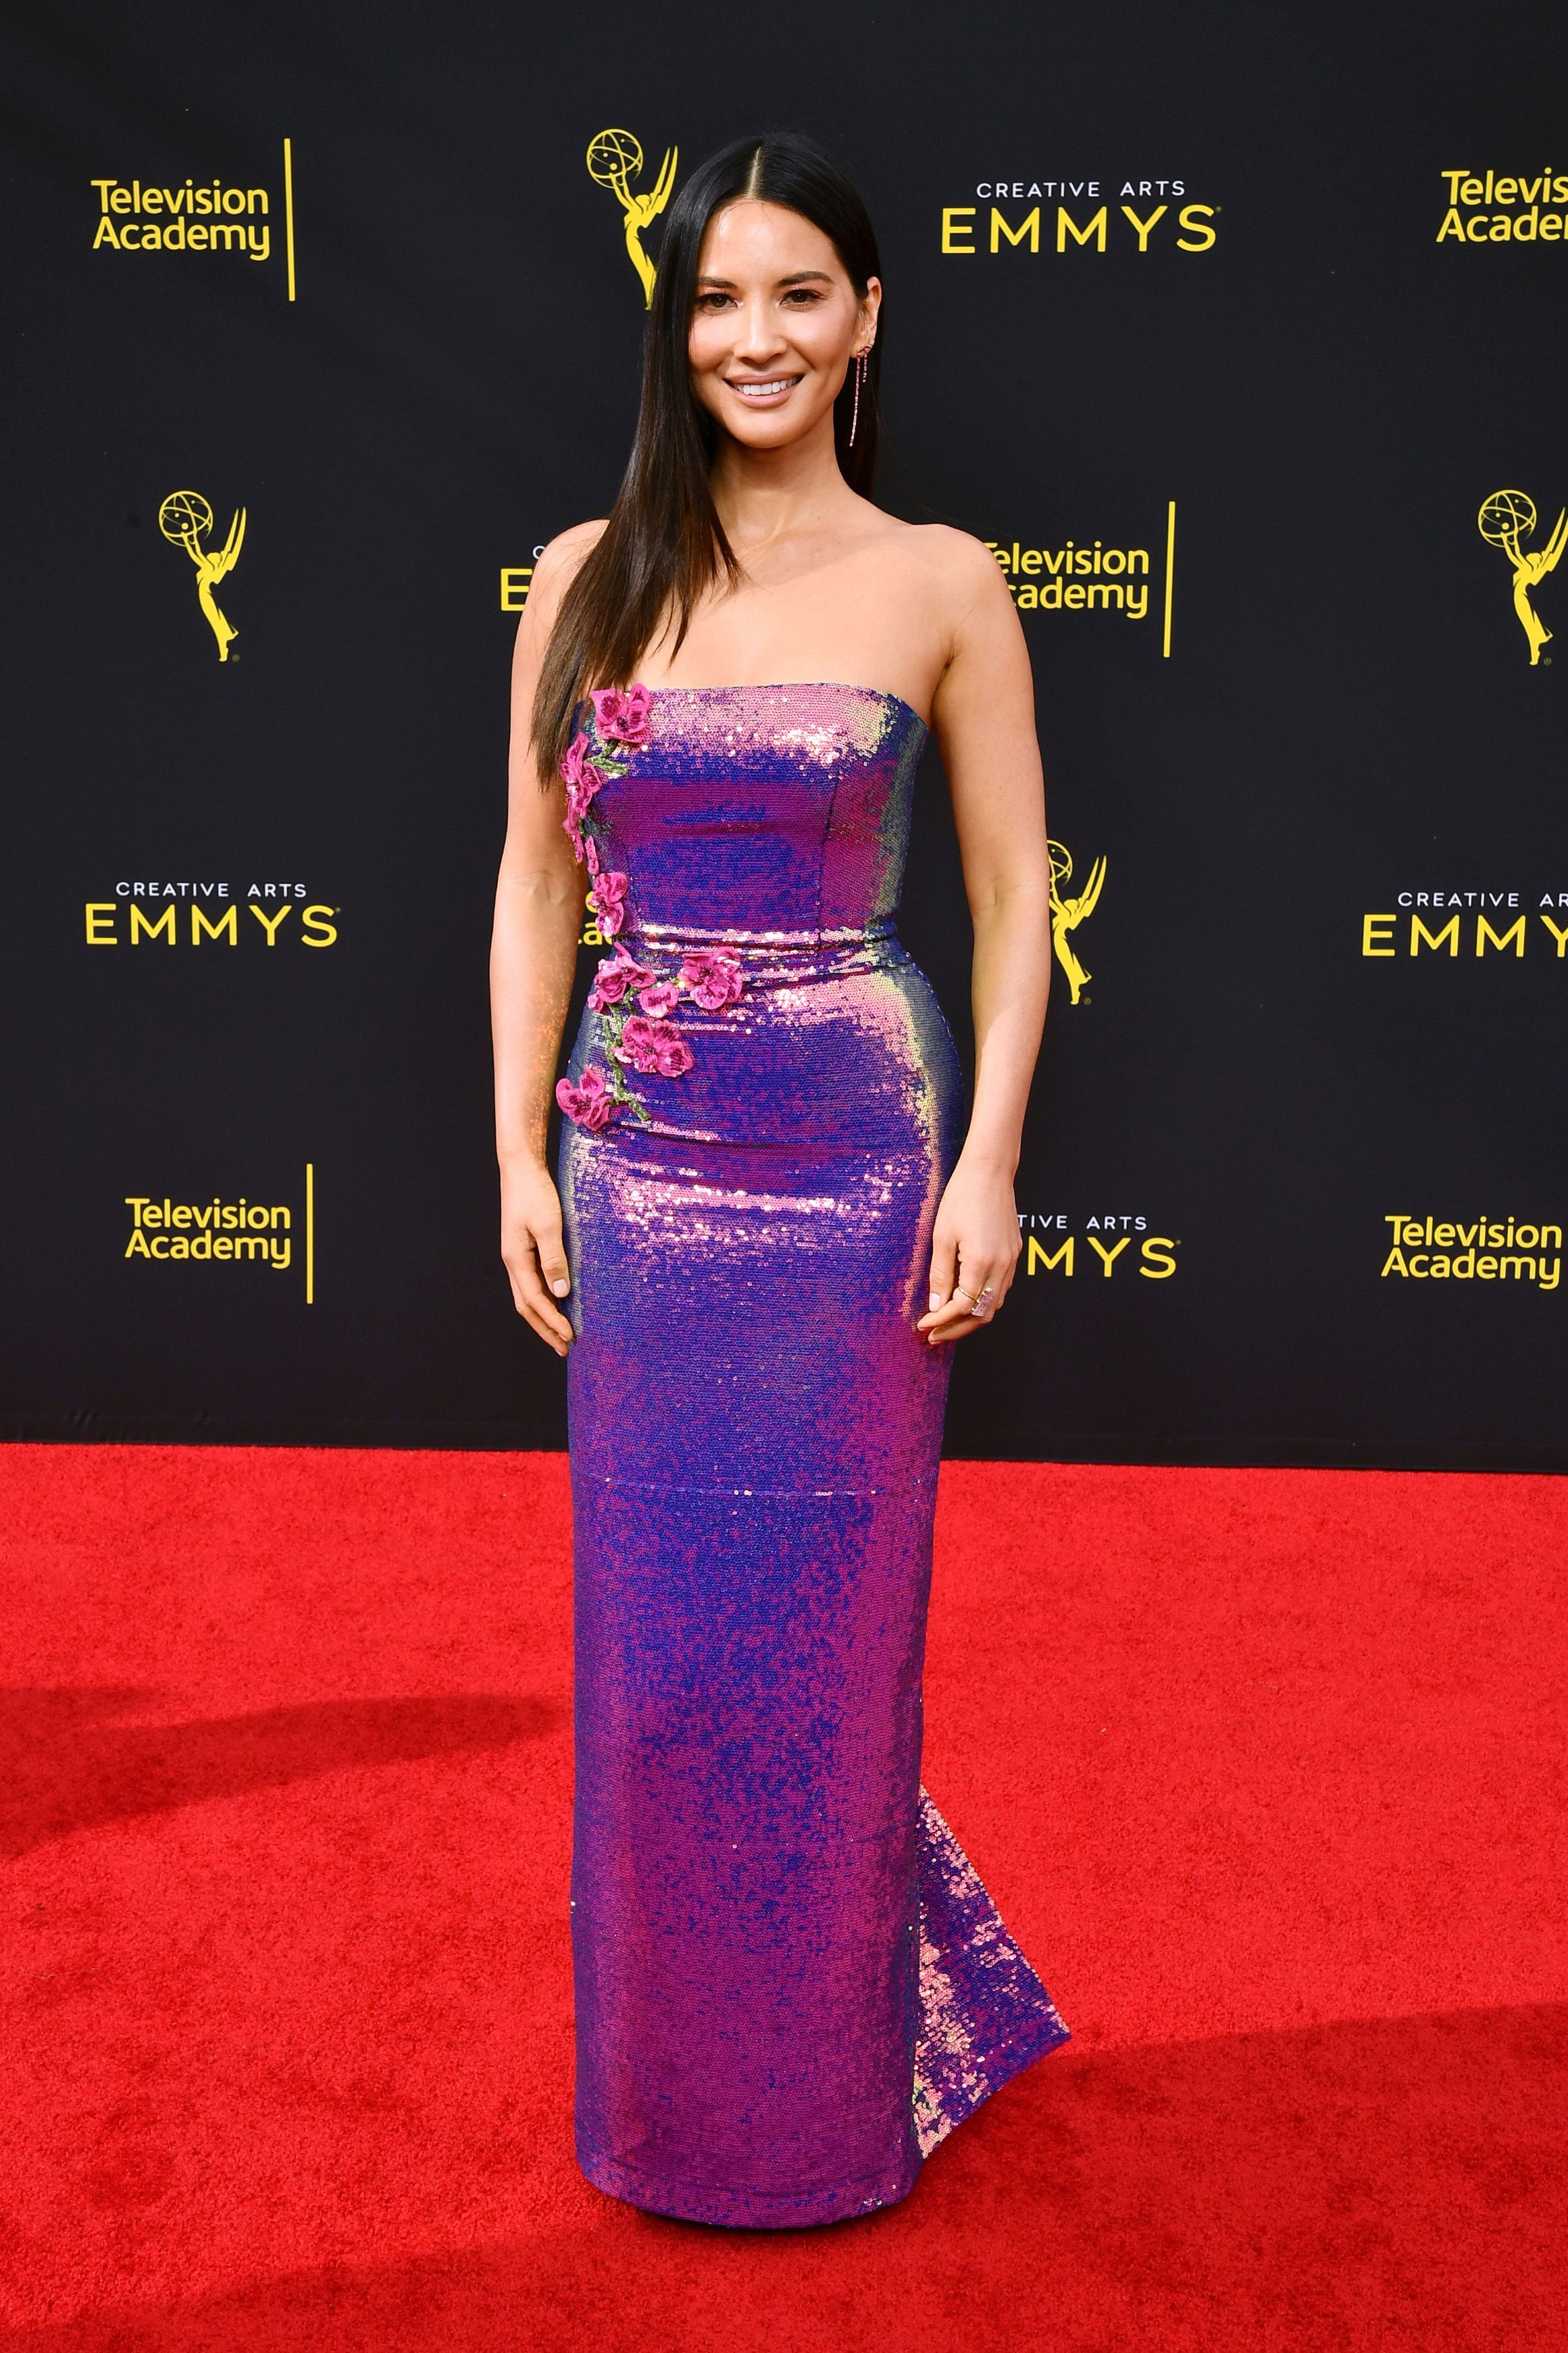 2019 Creative Arts Emmy Awards: See all the photos from the red carpet | Gallery |